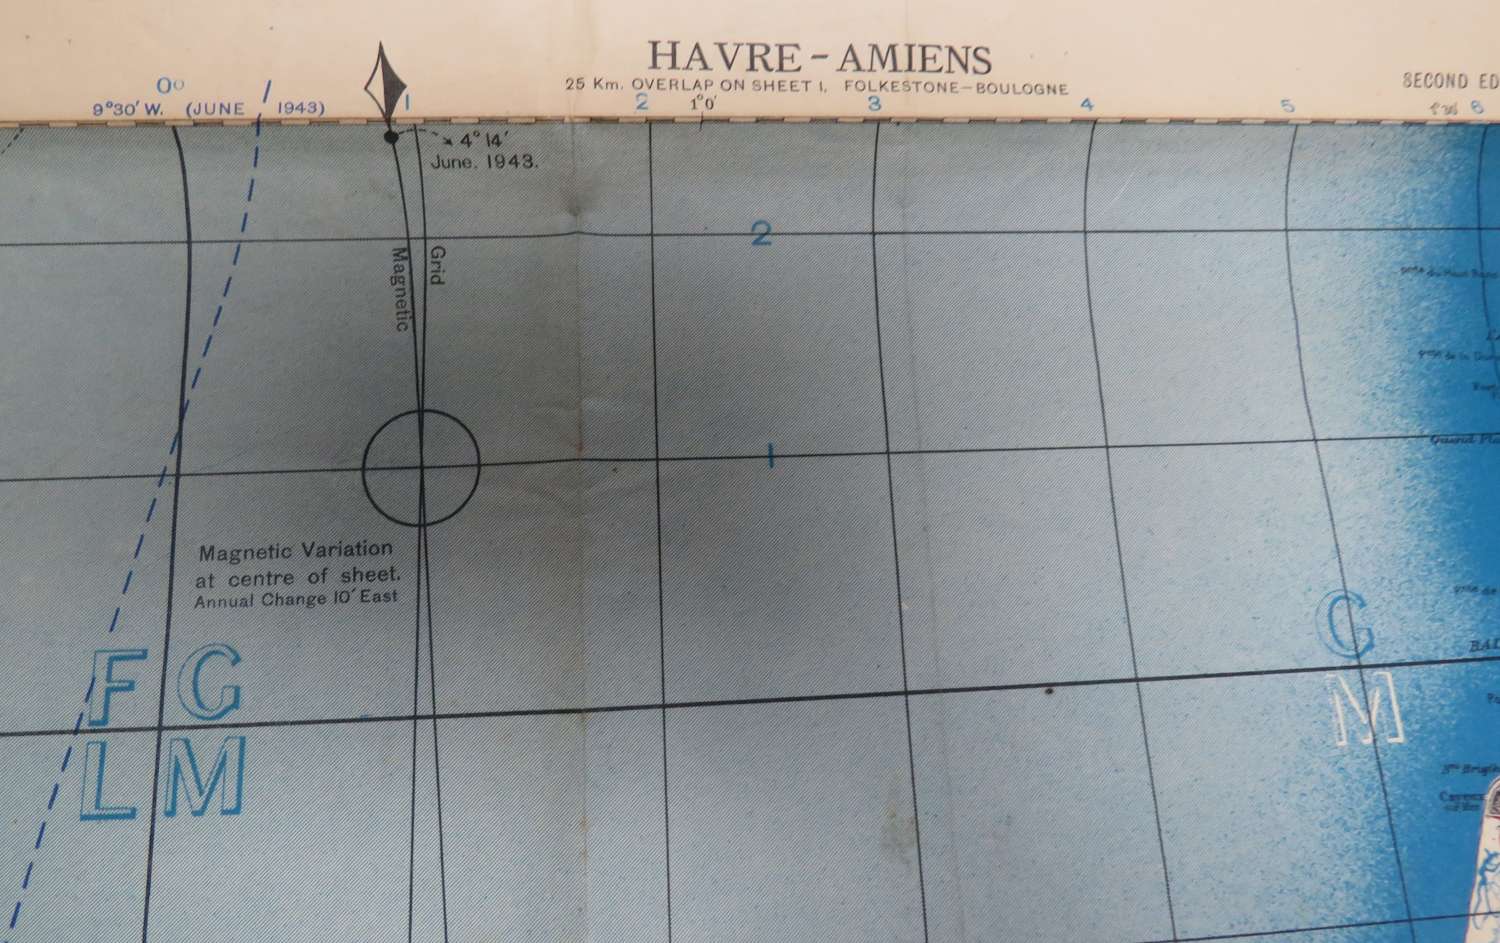 WW2 Army / Air Map Havre - Amiens and the Surrounding Area